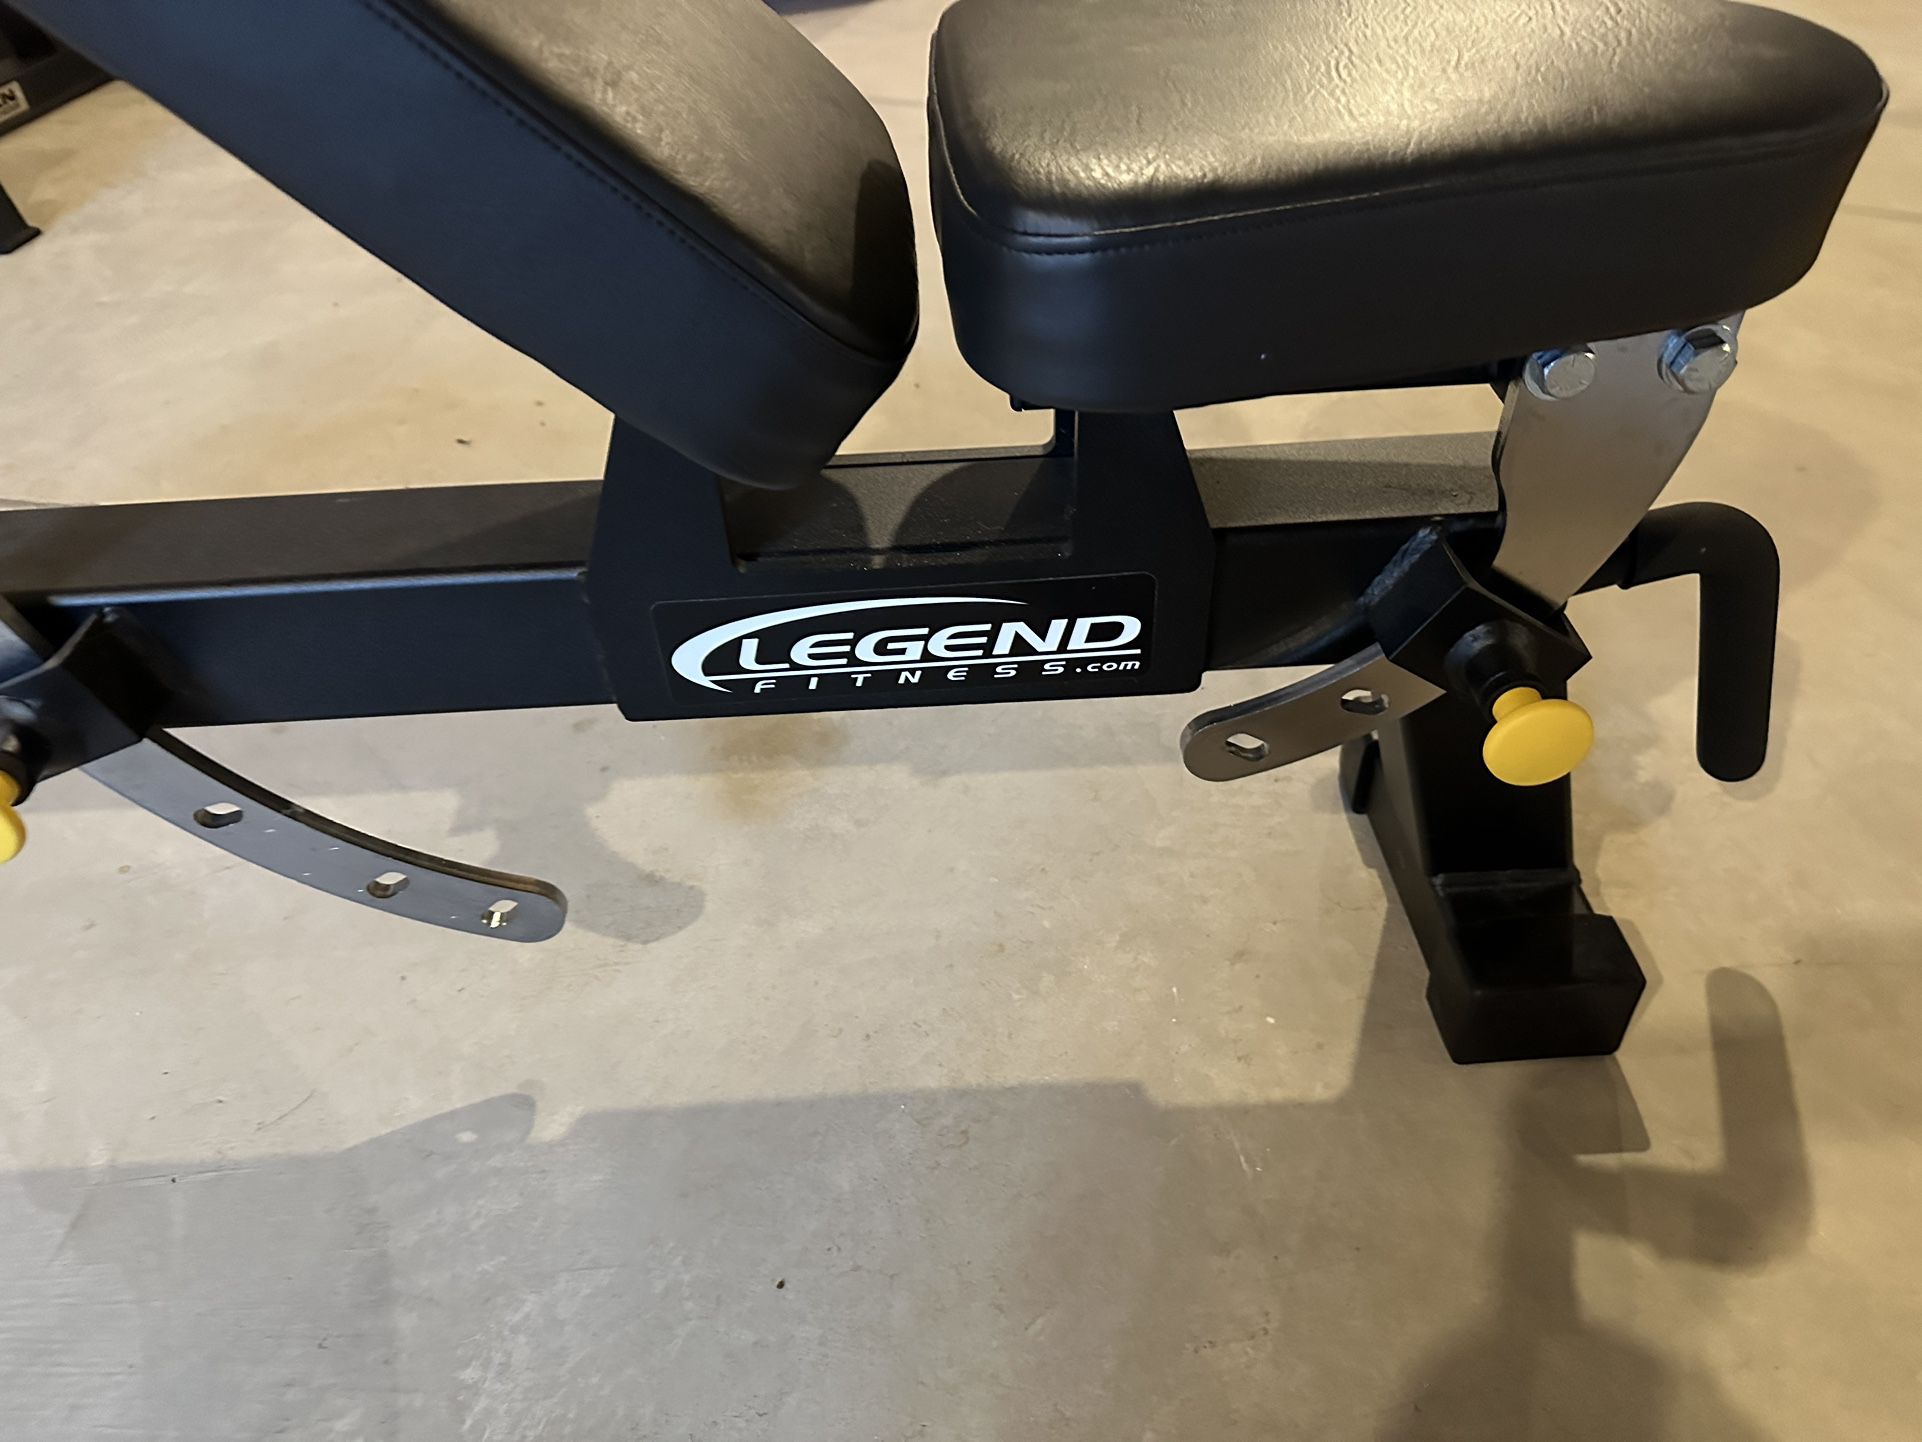 Legend Fitness - Performance Series 3-Way Utility Bench